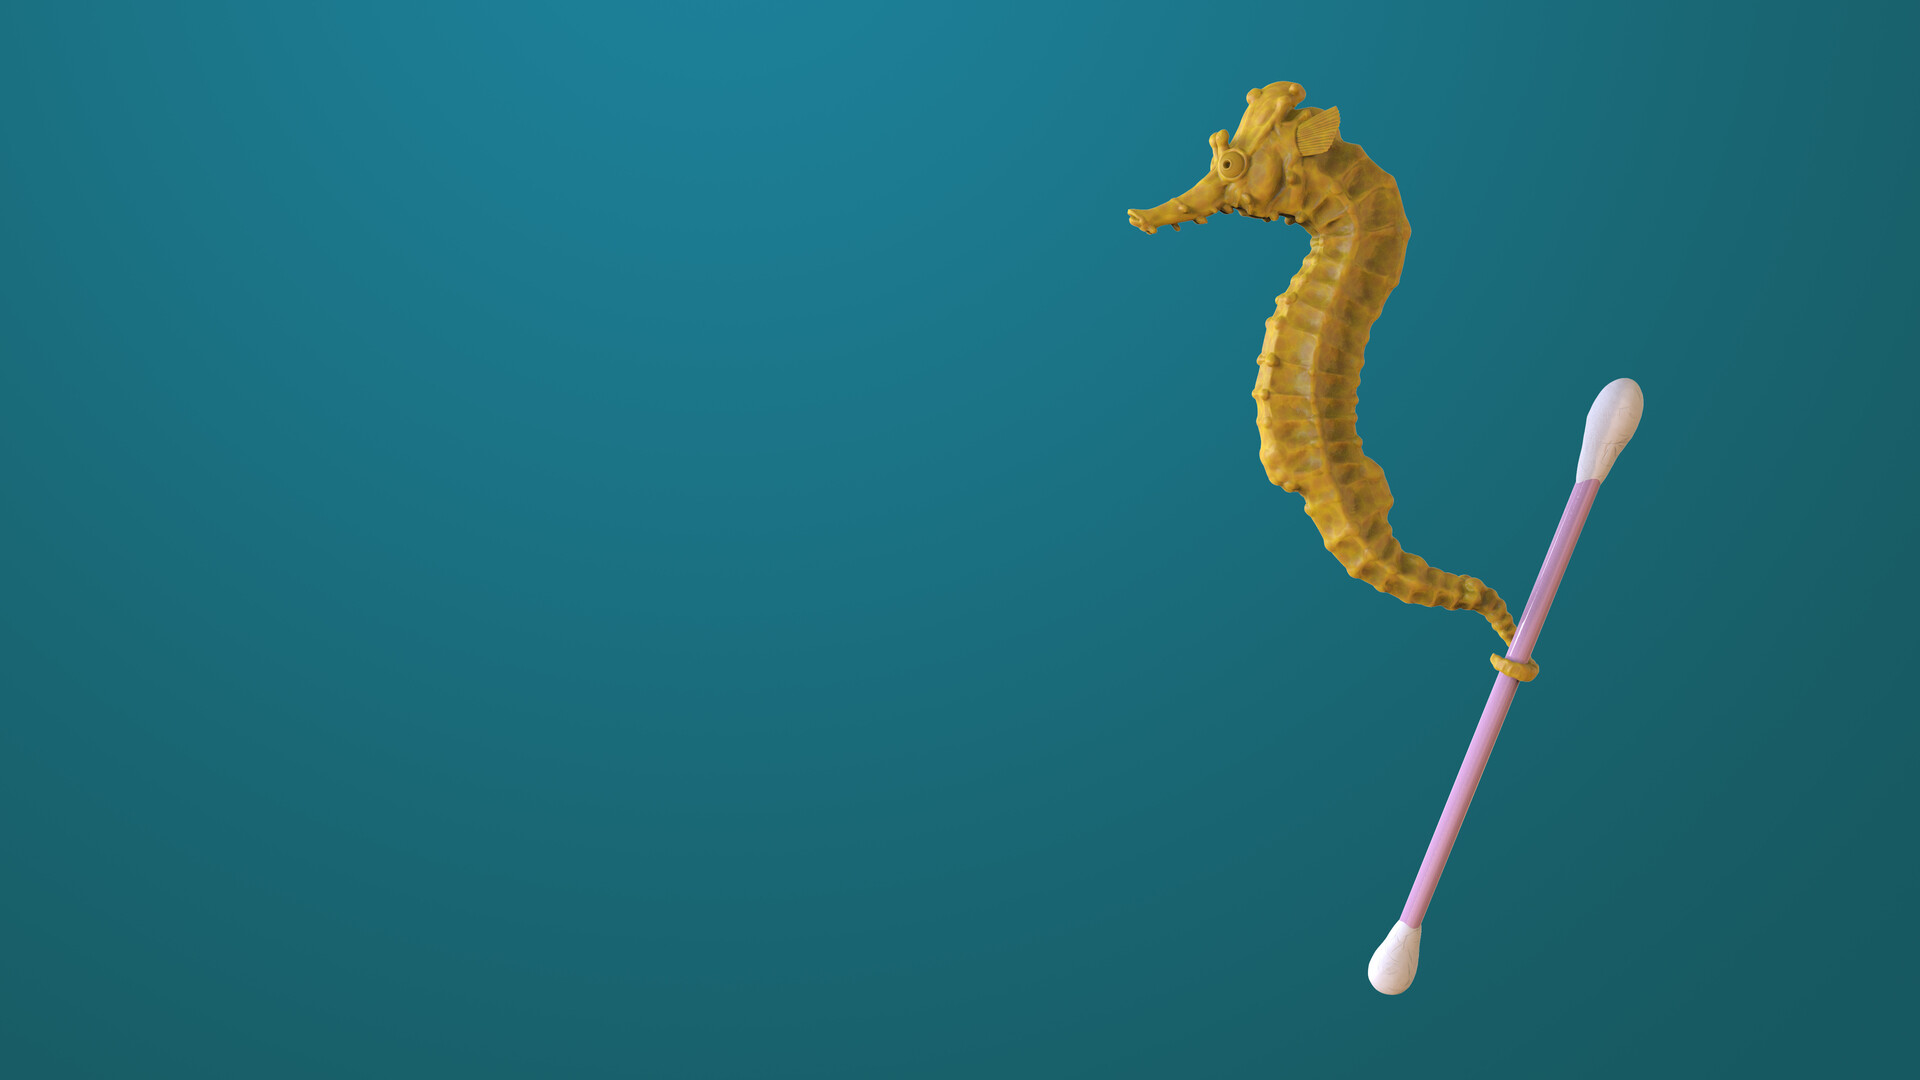 This Is The Story Behind That Tragic, Viral Photo Of A Seahorse Holding A Q-tip: Digital Photography Review | annadesignstuff.com